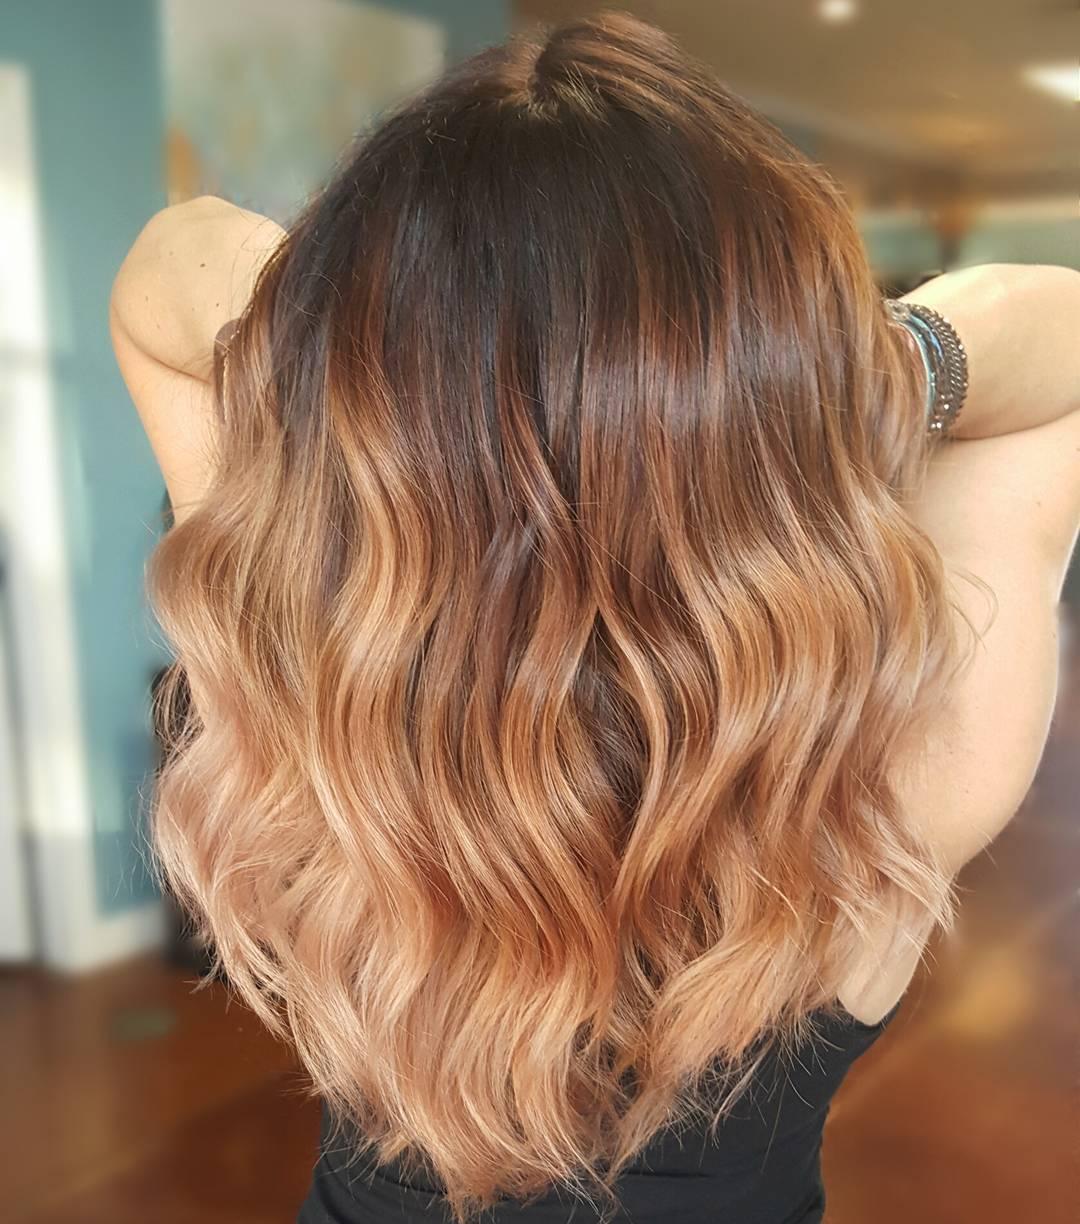 Back of woman's head with dark roots and caramel blonde hair styled with loose waves